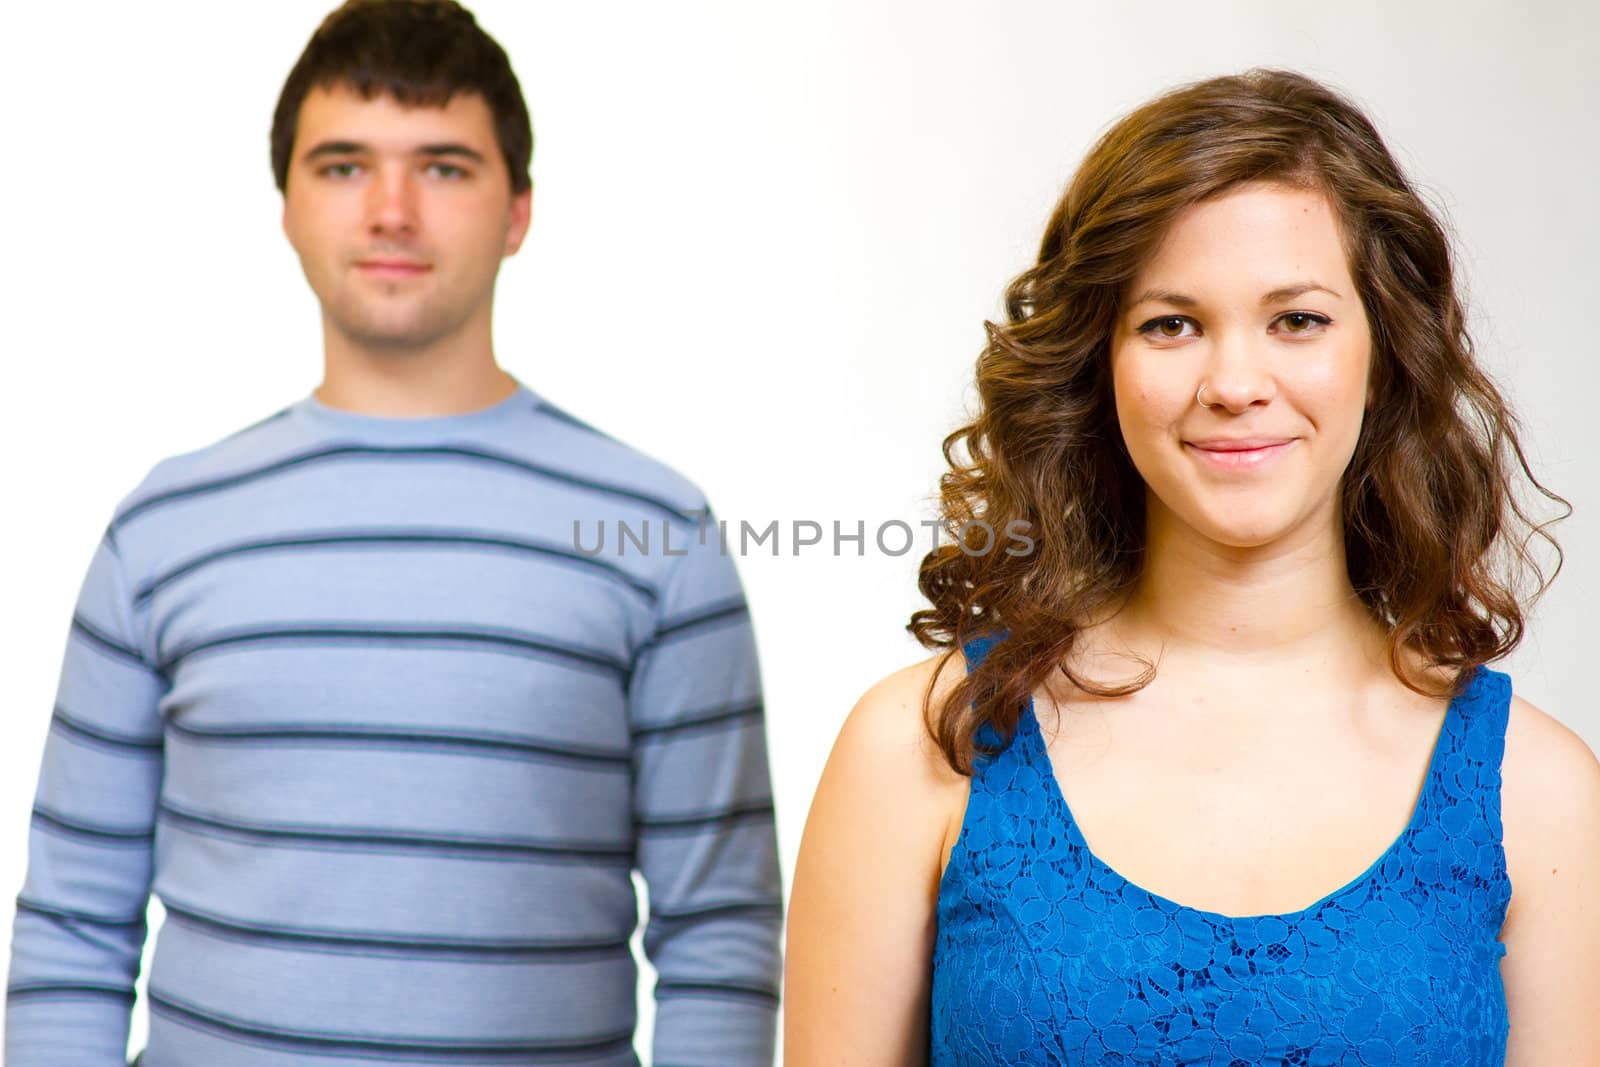 A white background studio shot of a young couple in blue fashionable stylish outfits.